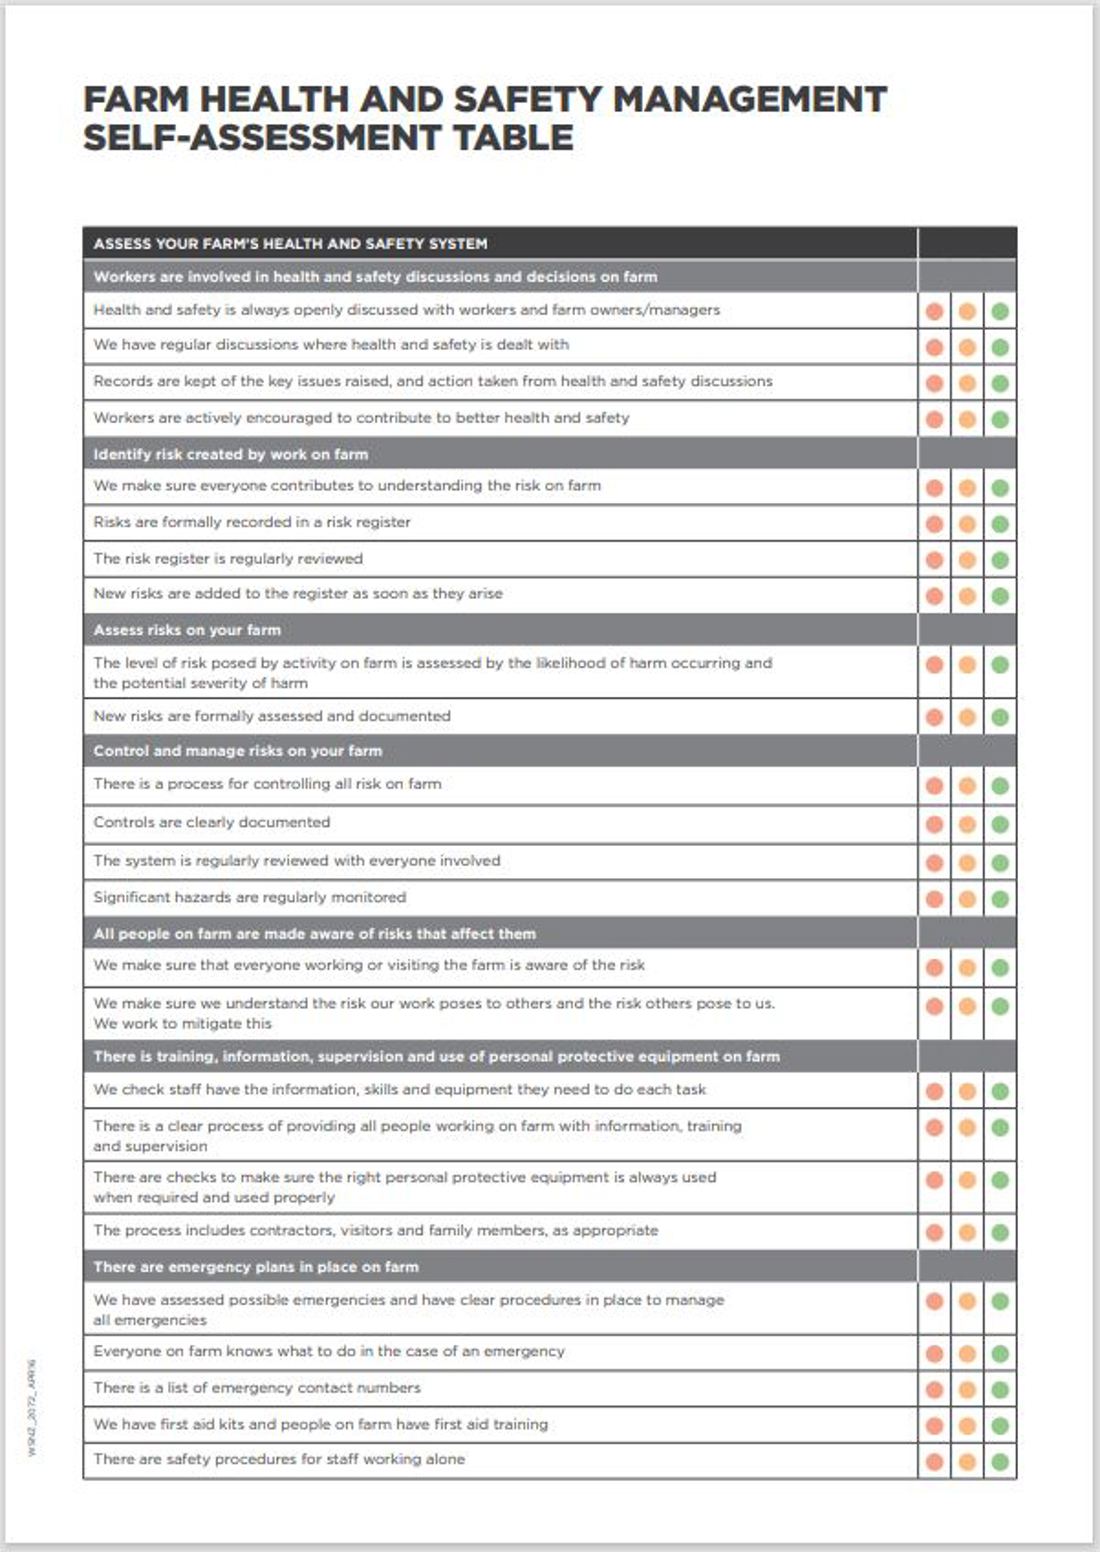 Farm Health And Safety Management Self Assessment Table Image